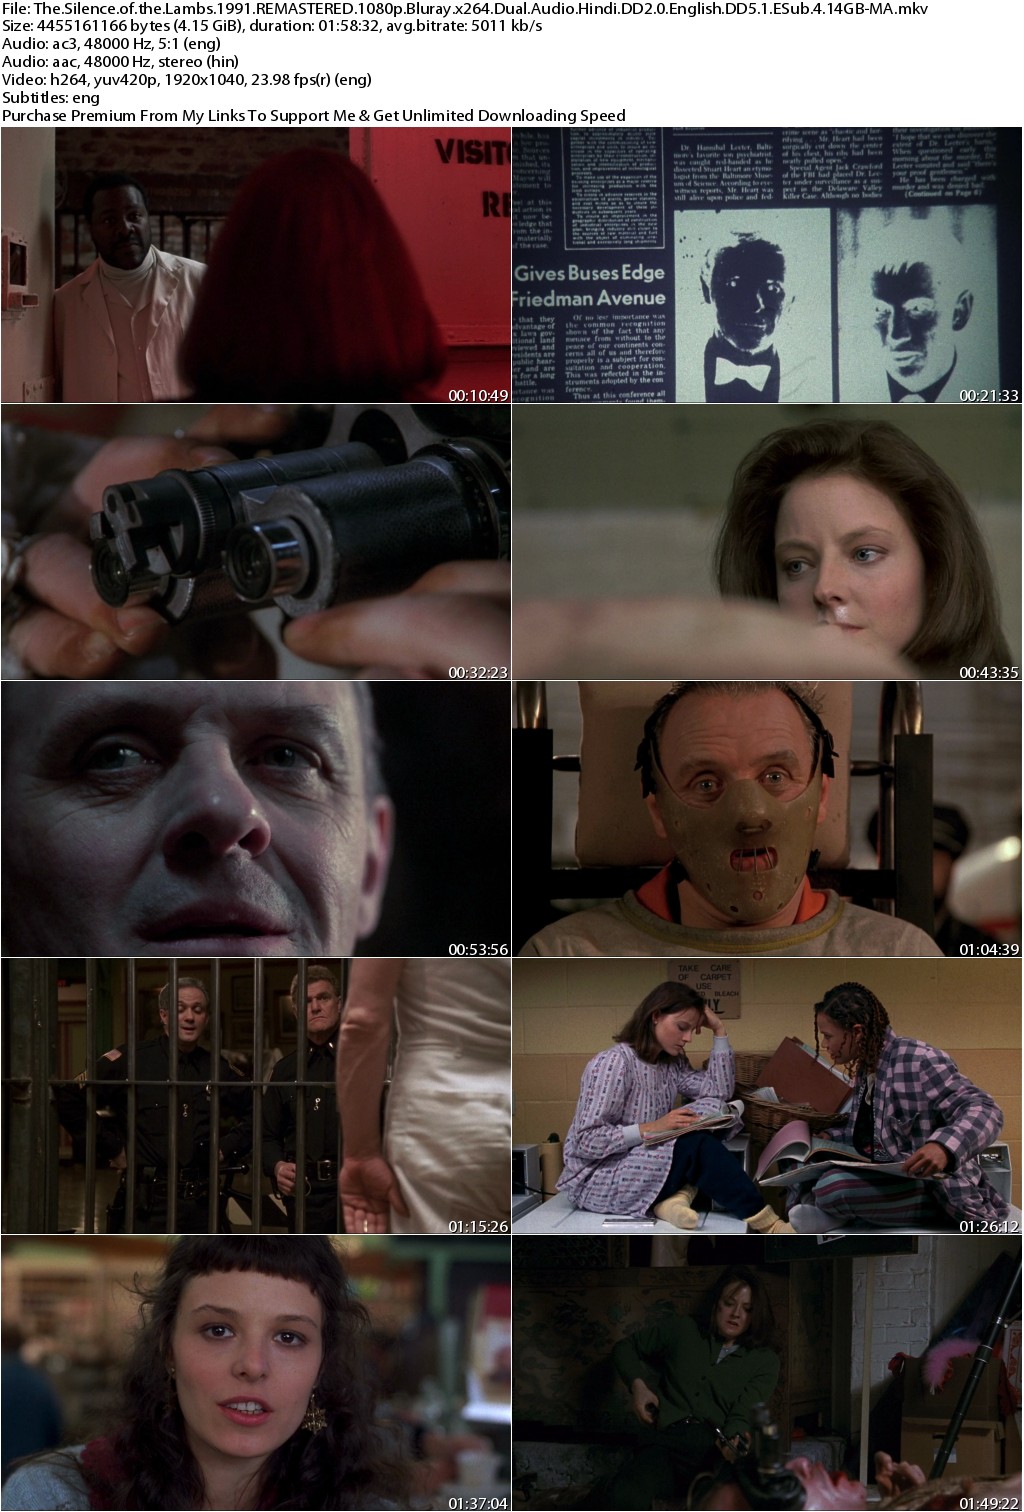 The Silence of the Lambs (1991) REMASTERED 1080p Bluray x264 Dual Audio Hin...